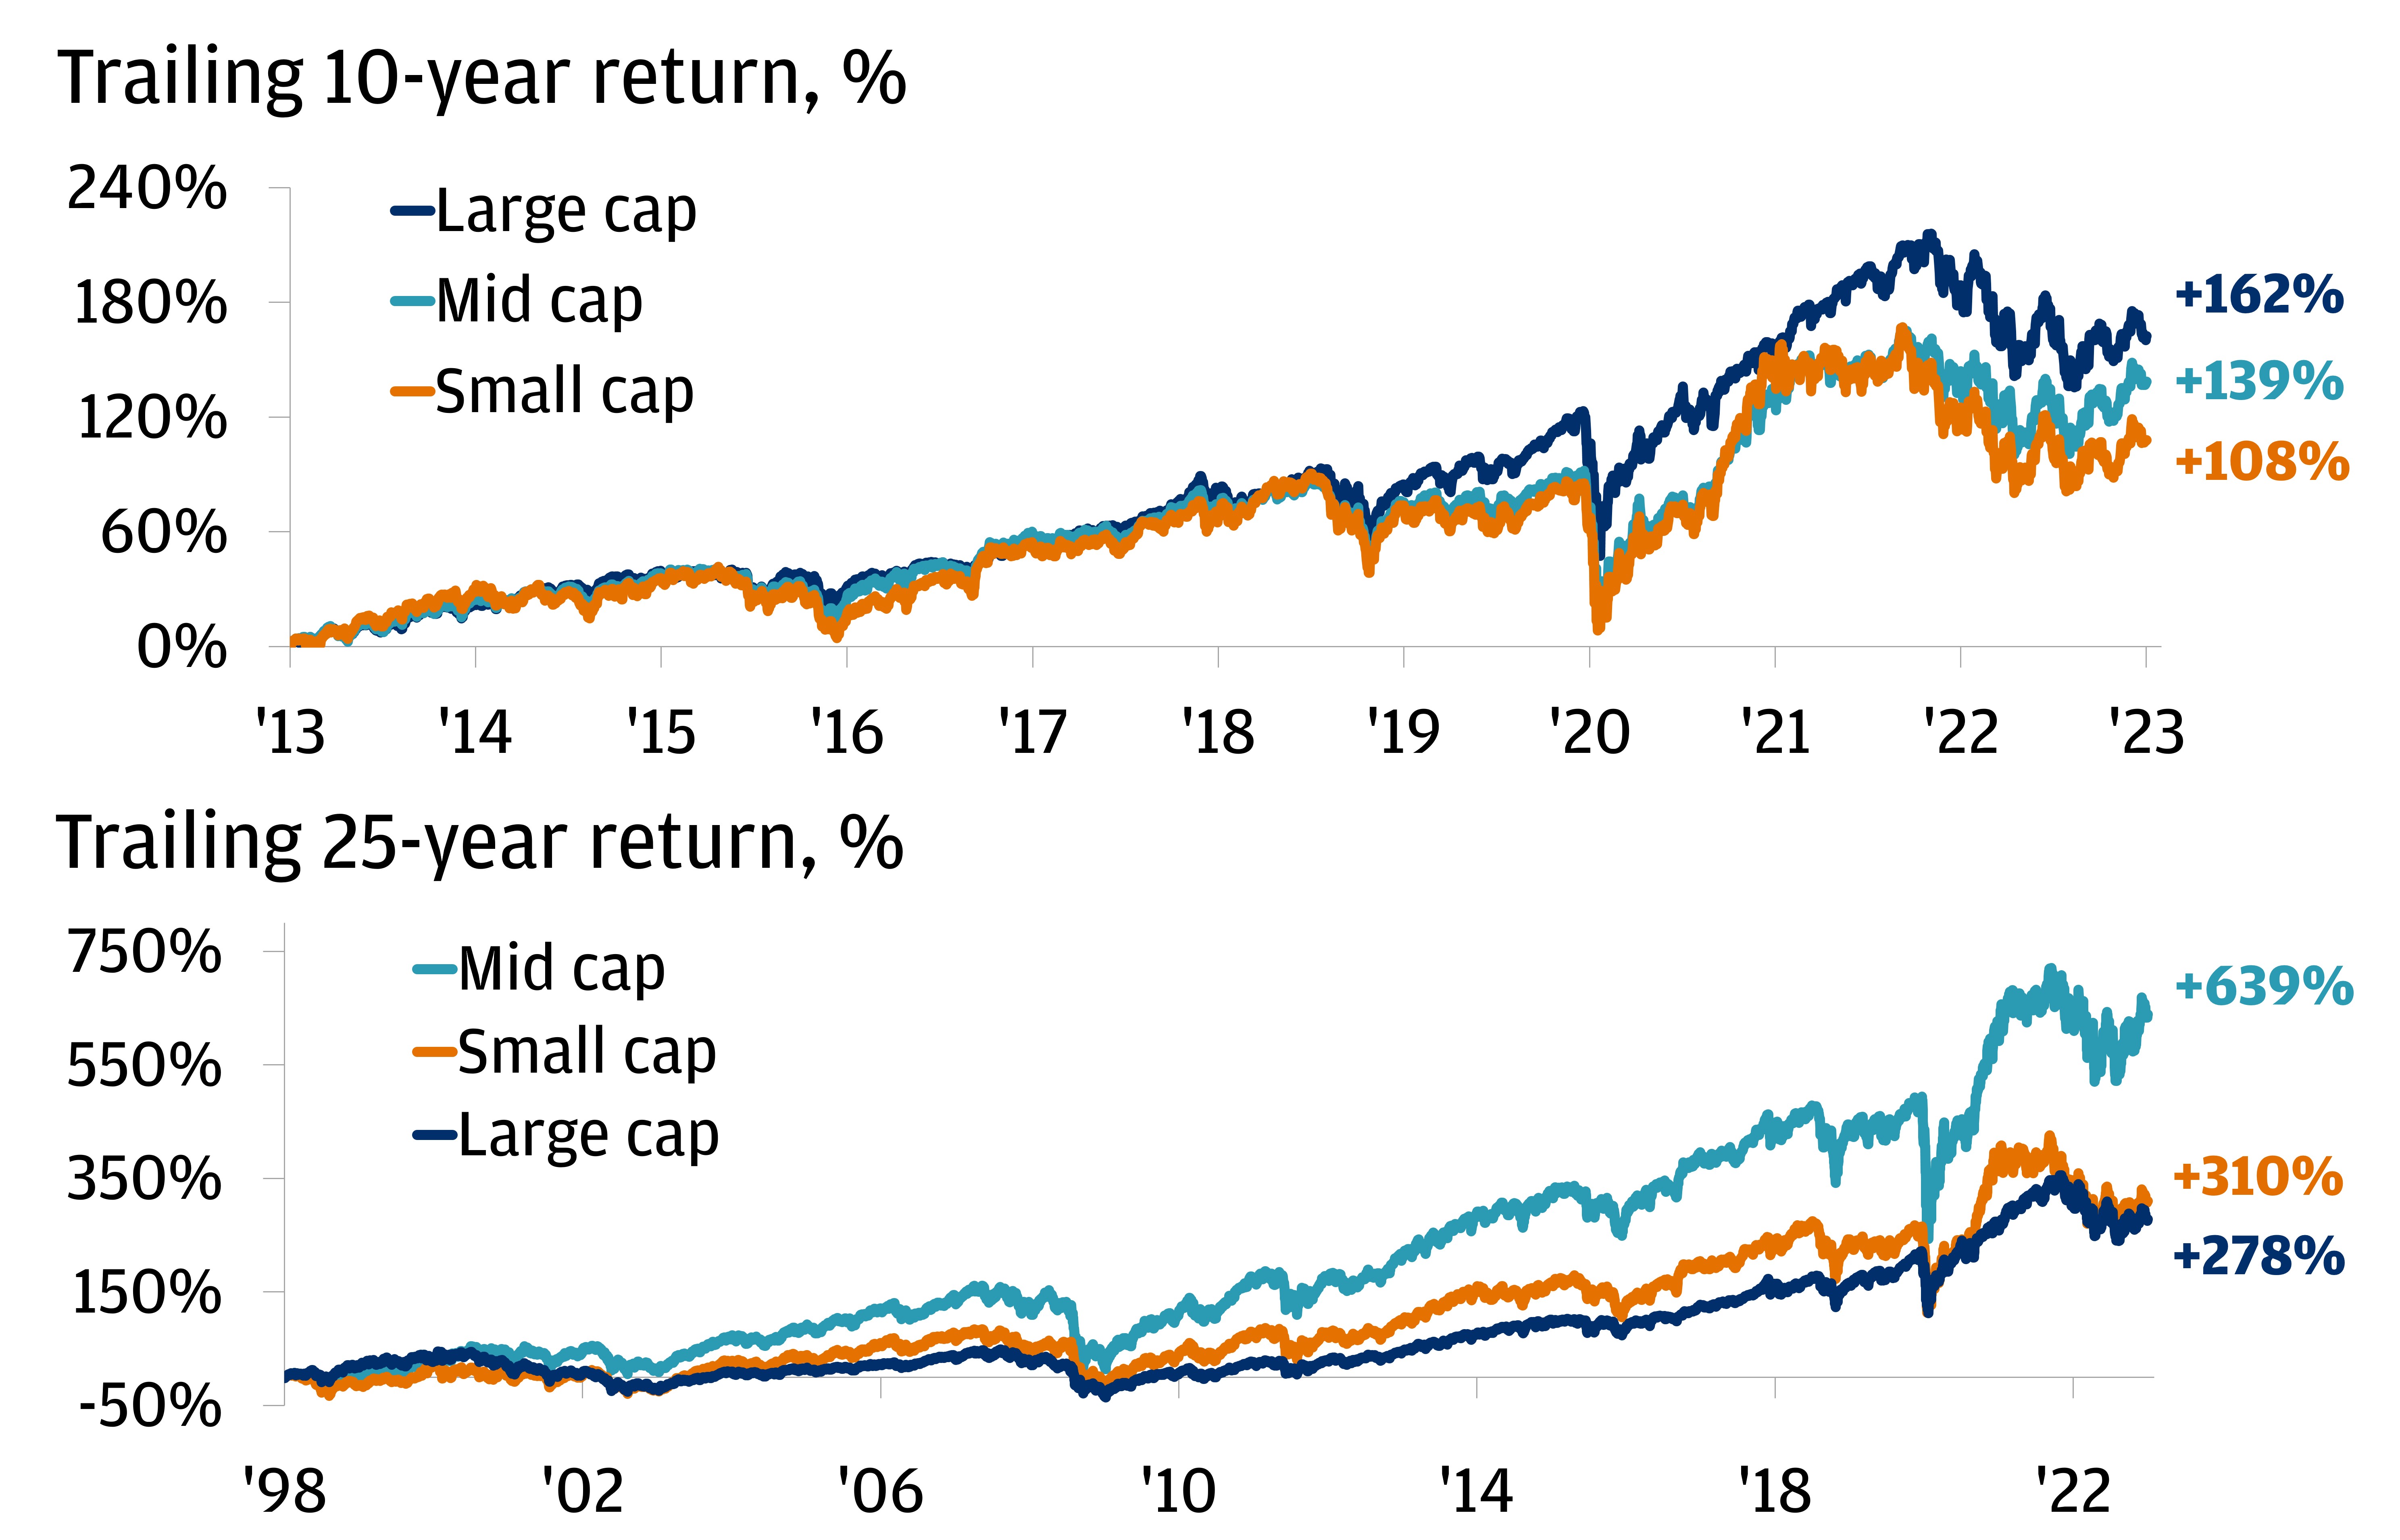 These line charts show the returns of large-cap (S&P 500), mid-cap (S&P 400) and small-cap (Russell 2000) equity returns over the past 10 and 25 years.